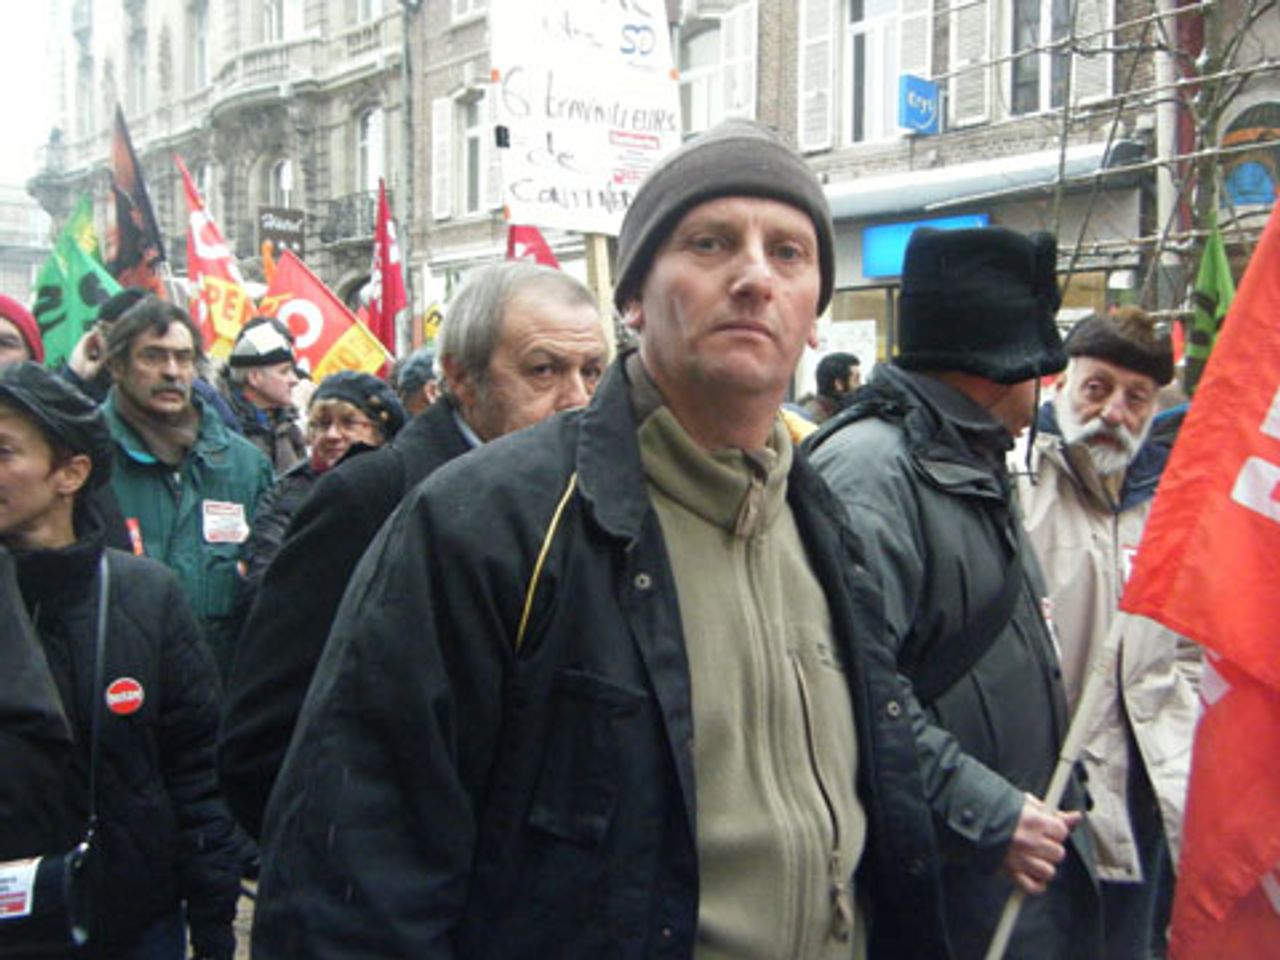 Olivier (center) in the march